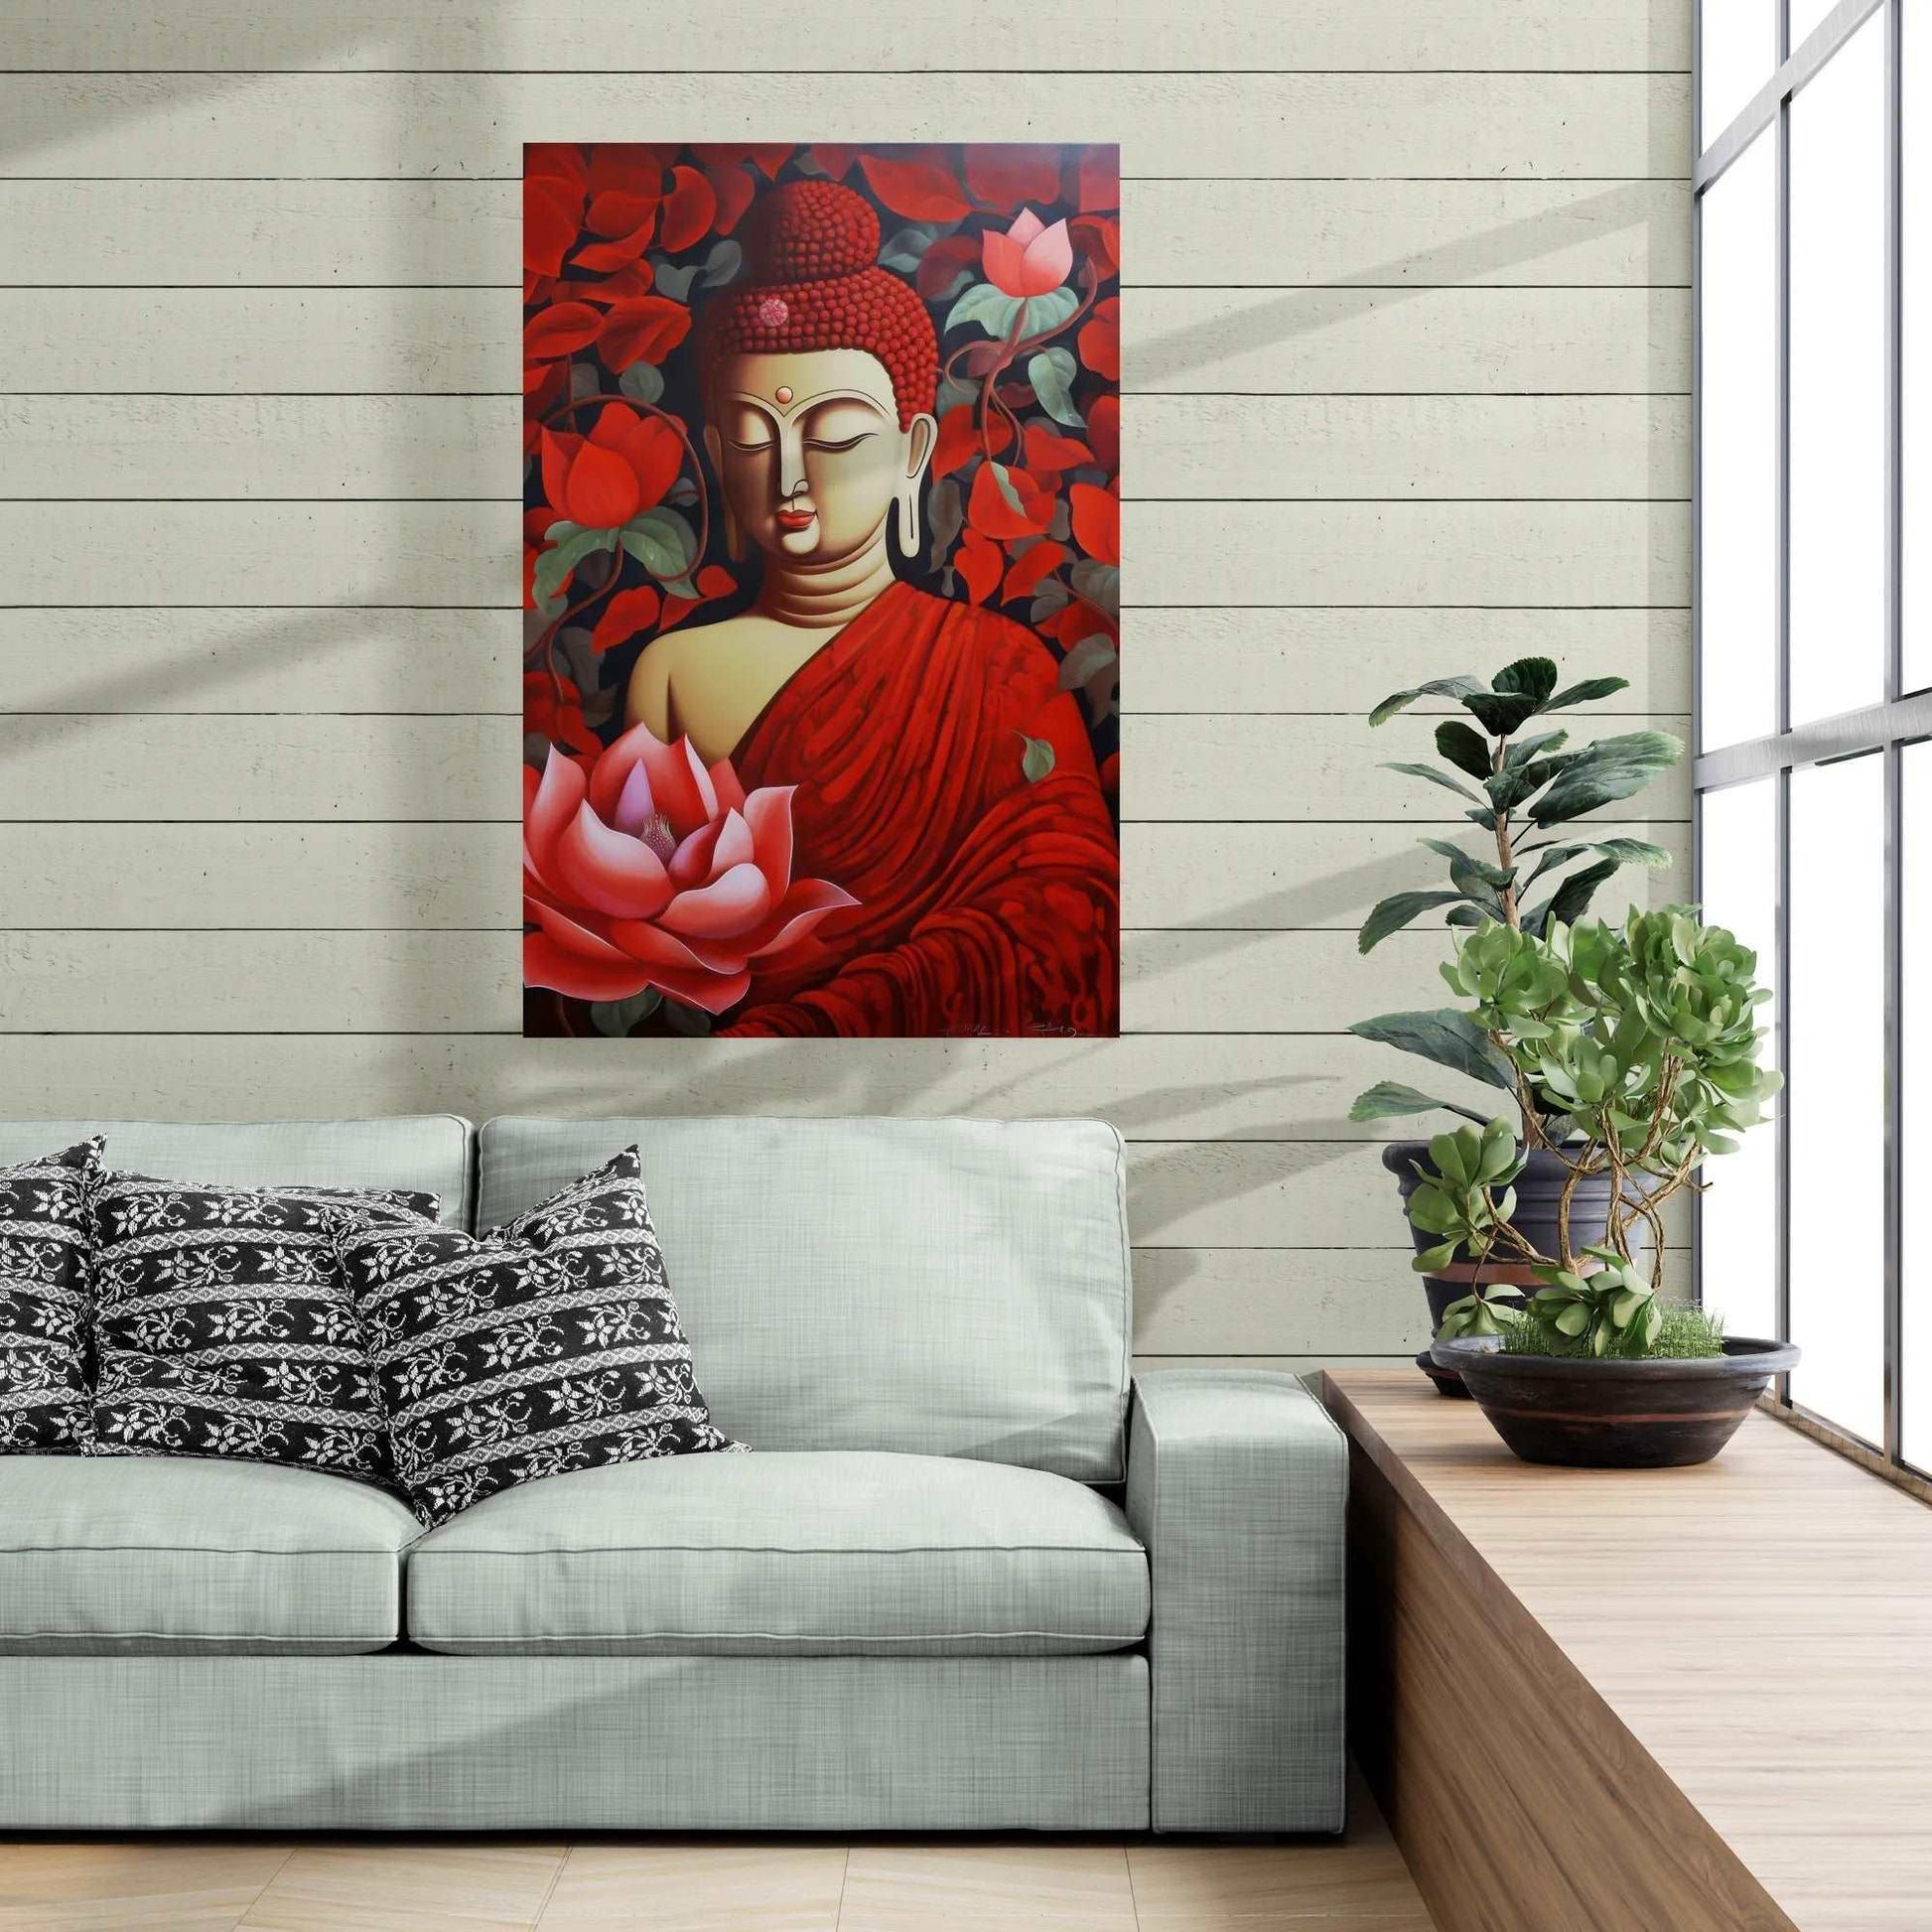 Calm Buddha painting in red and gold hues, surrounded by red flowers, above a gray sofa with patterned cushions, juxtaposed against a light wooden wall in a modern living space.